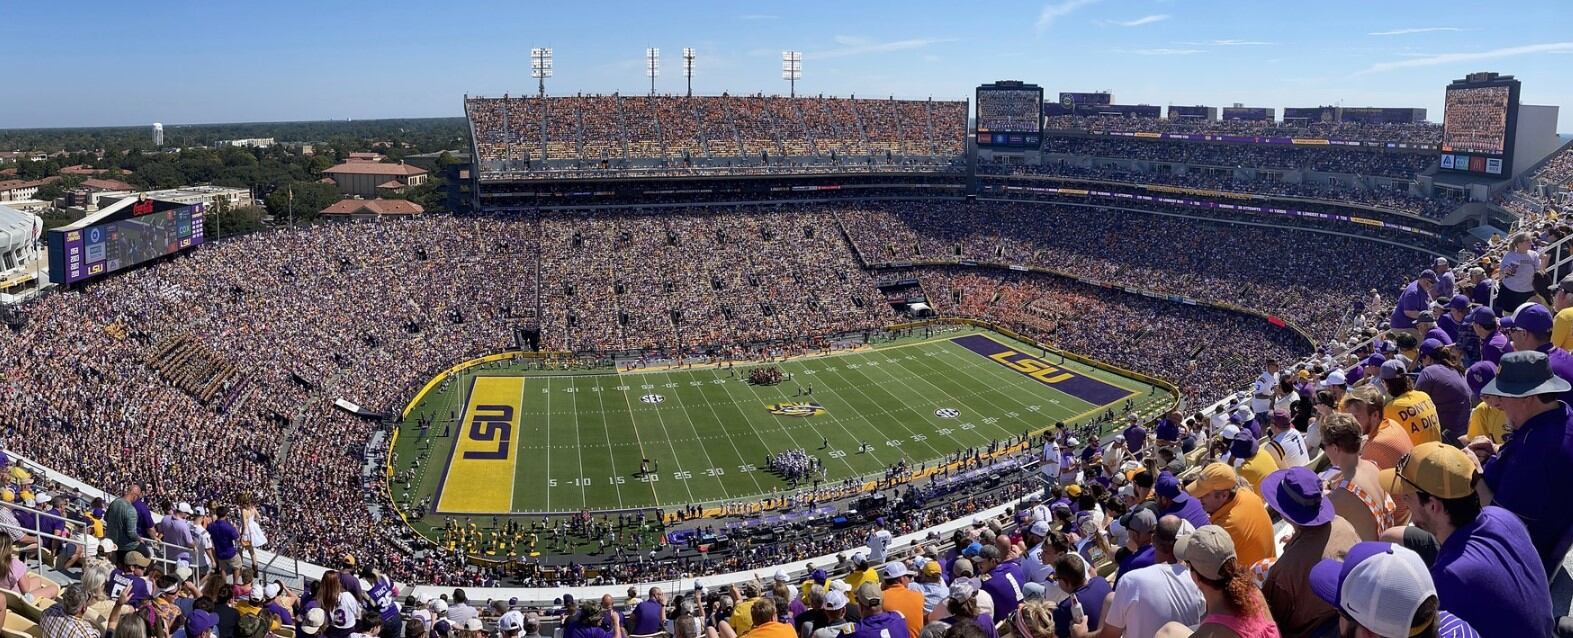 18-extraordinary-facts-about-tiger-stadium